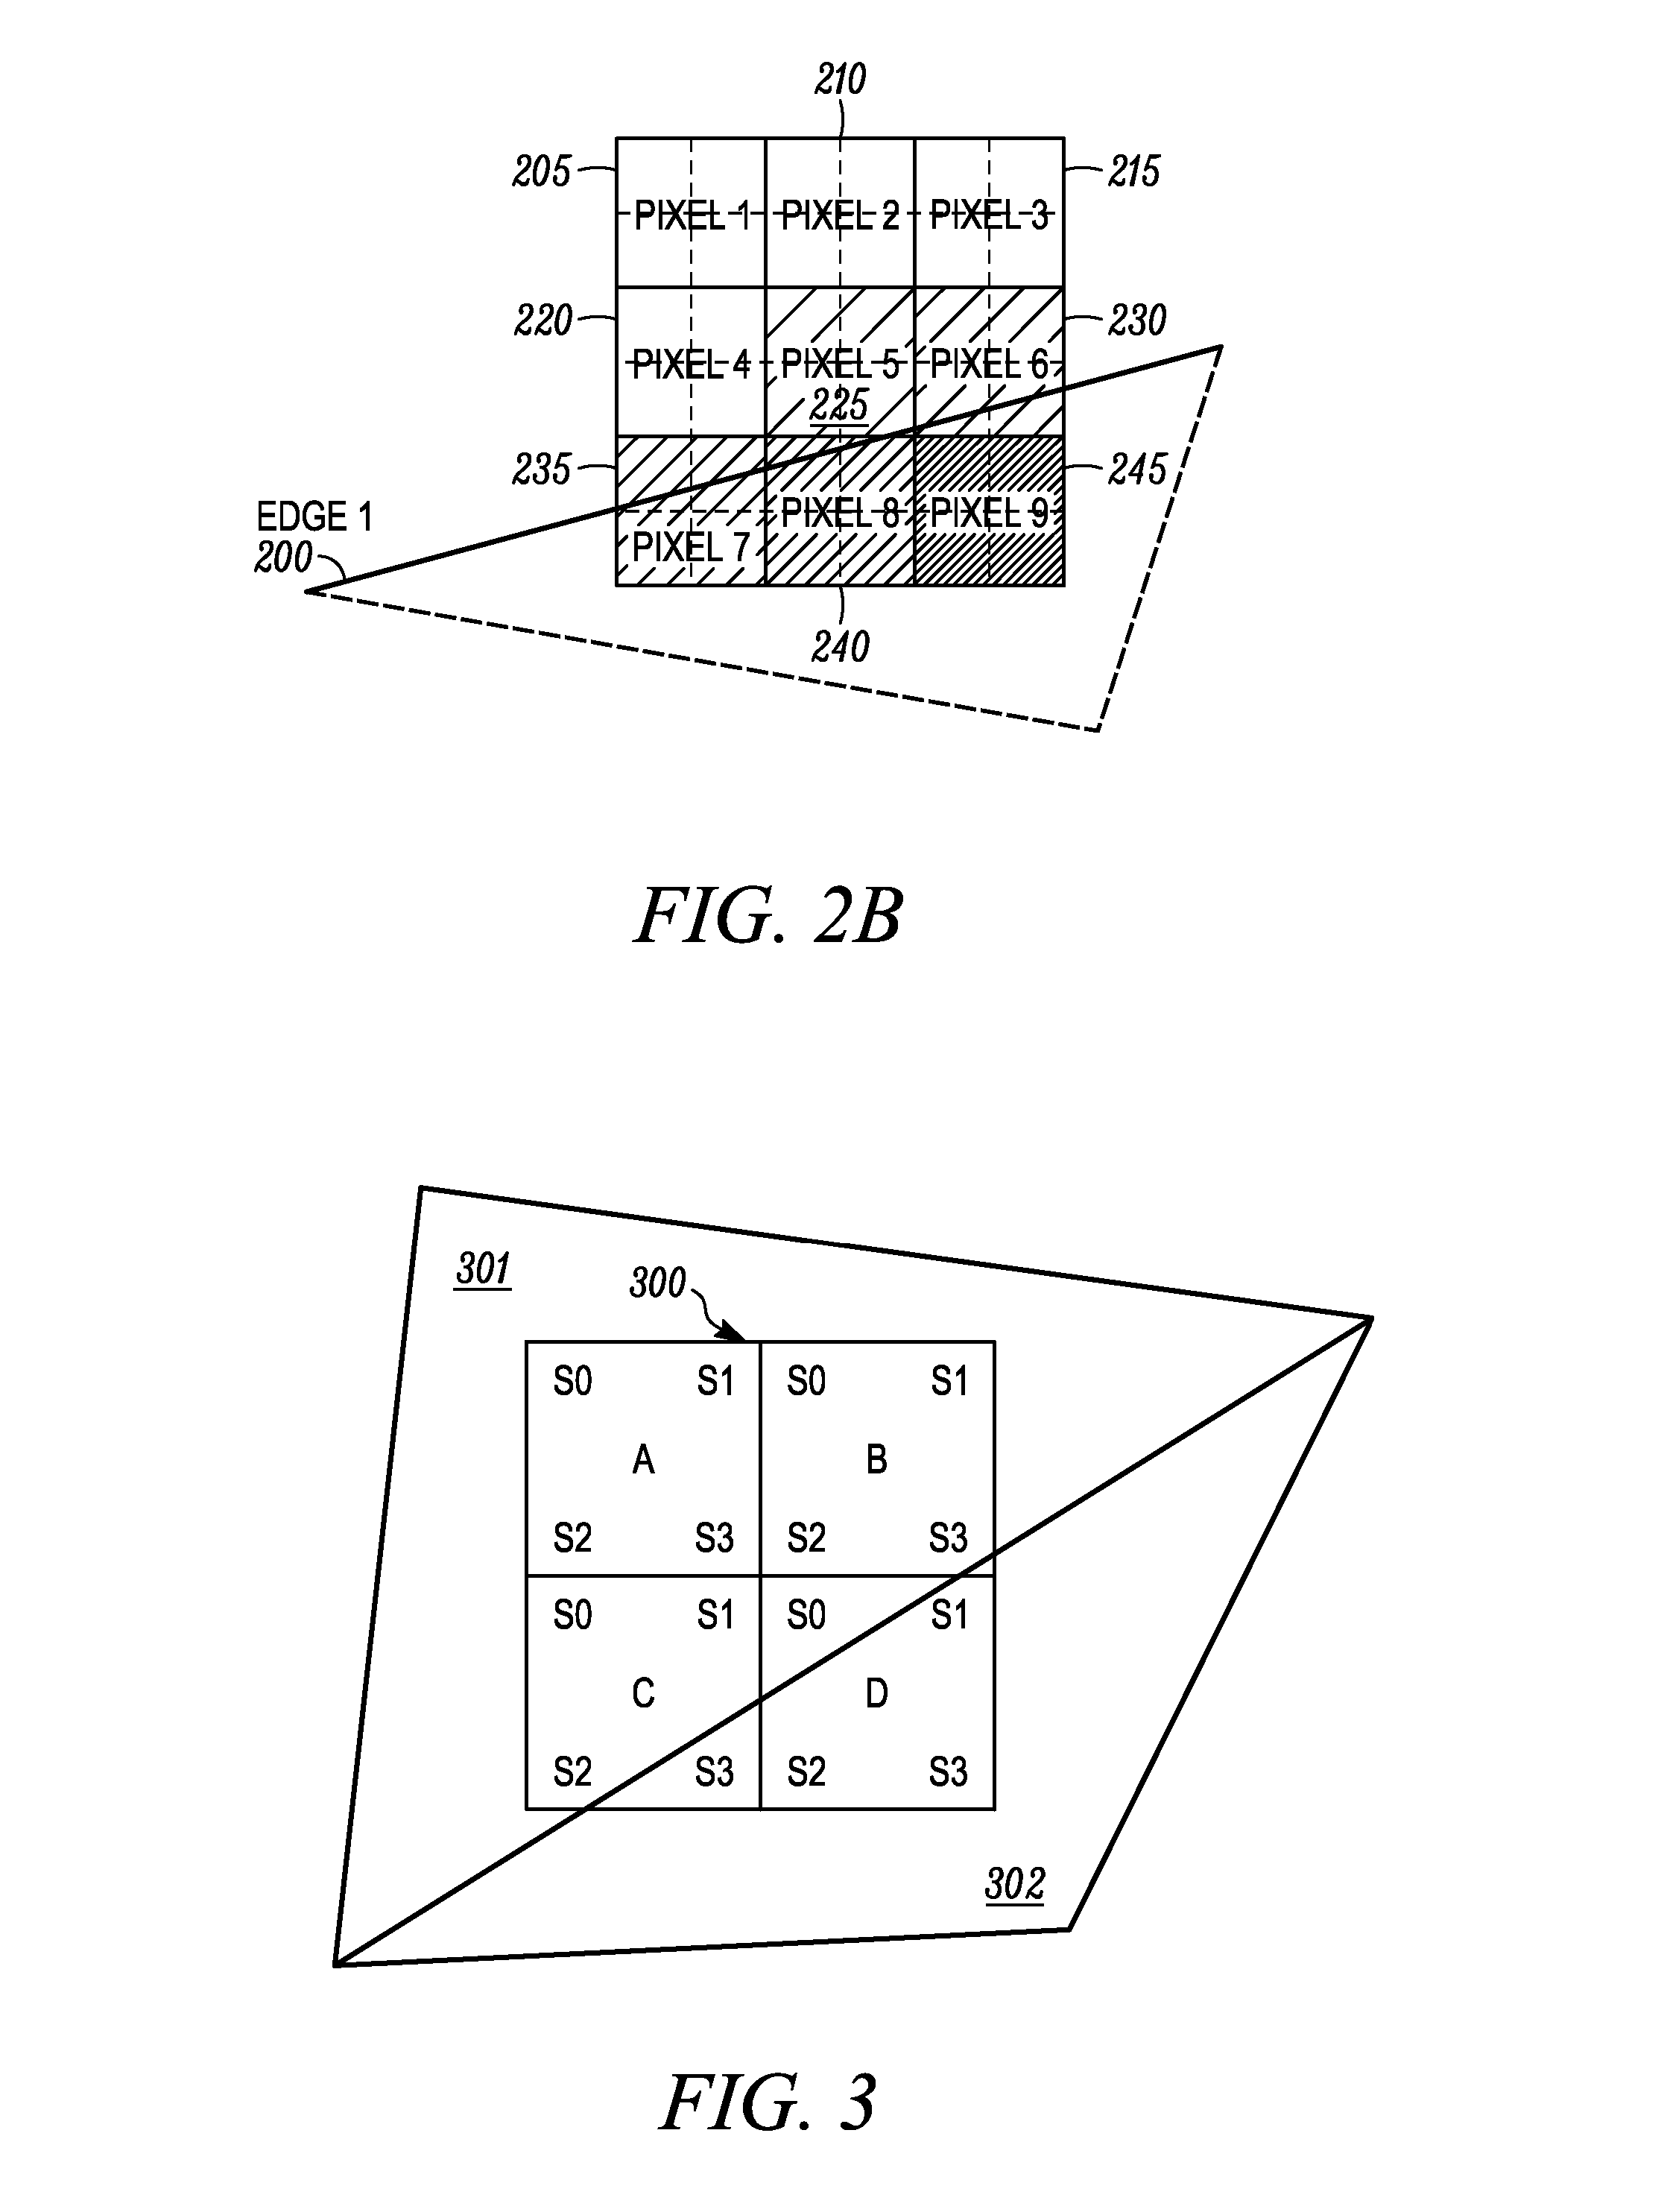 Method and apparatus for anti-aliasing using floating point subpixel color values and compression of same